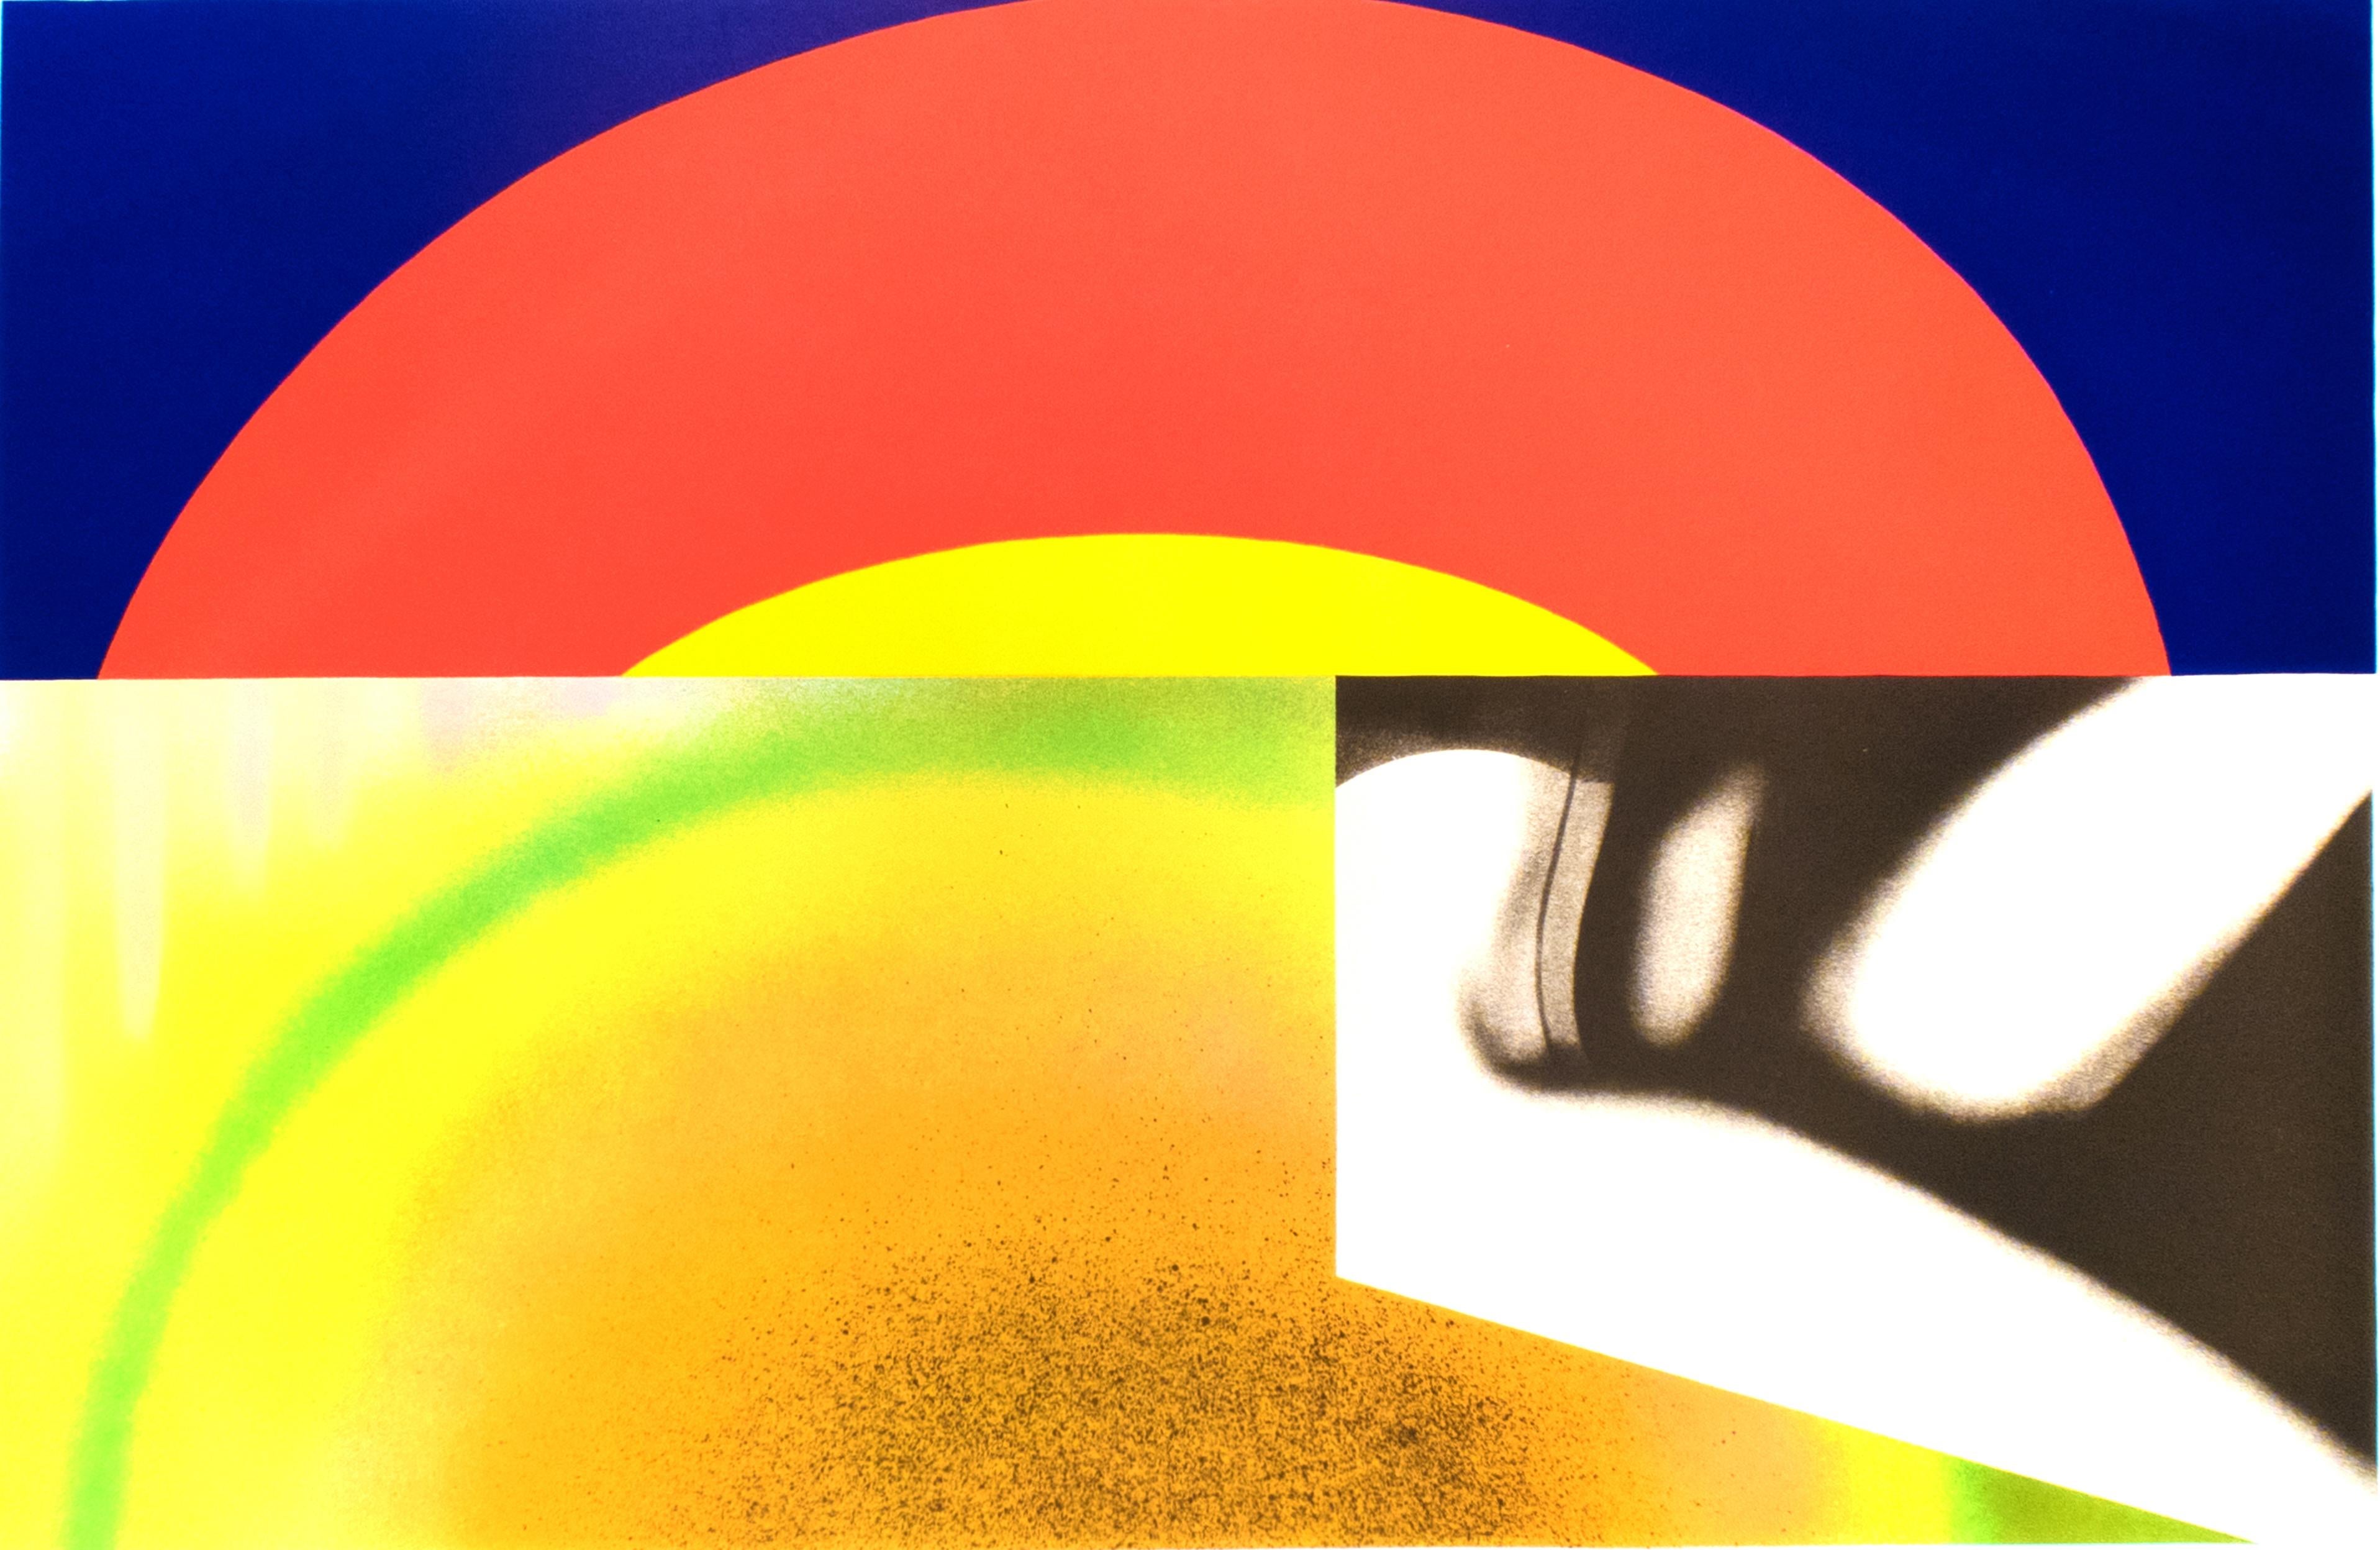 Brighter than the Sun, James Rosenquist: colorful abstract pop art rainbow